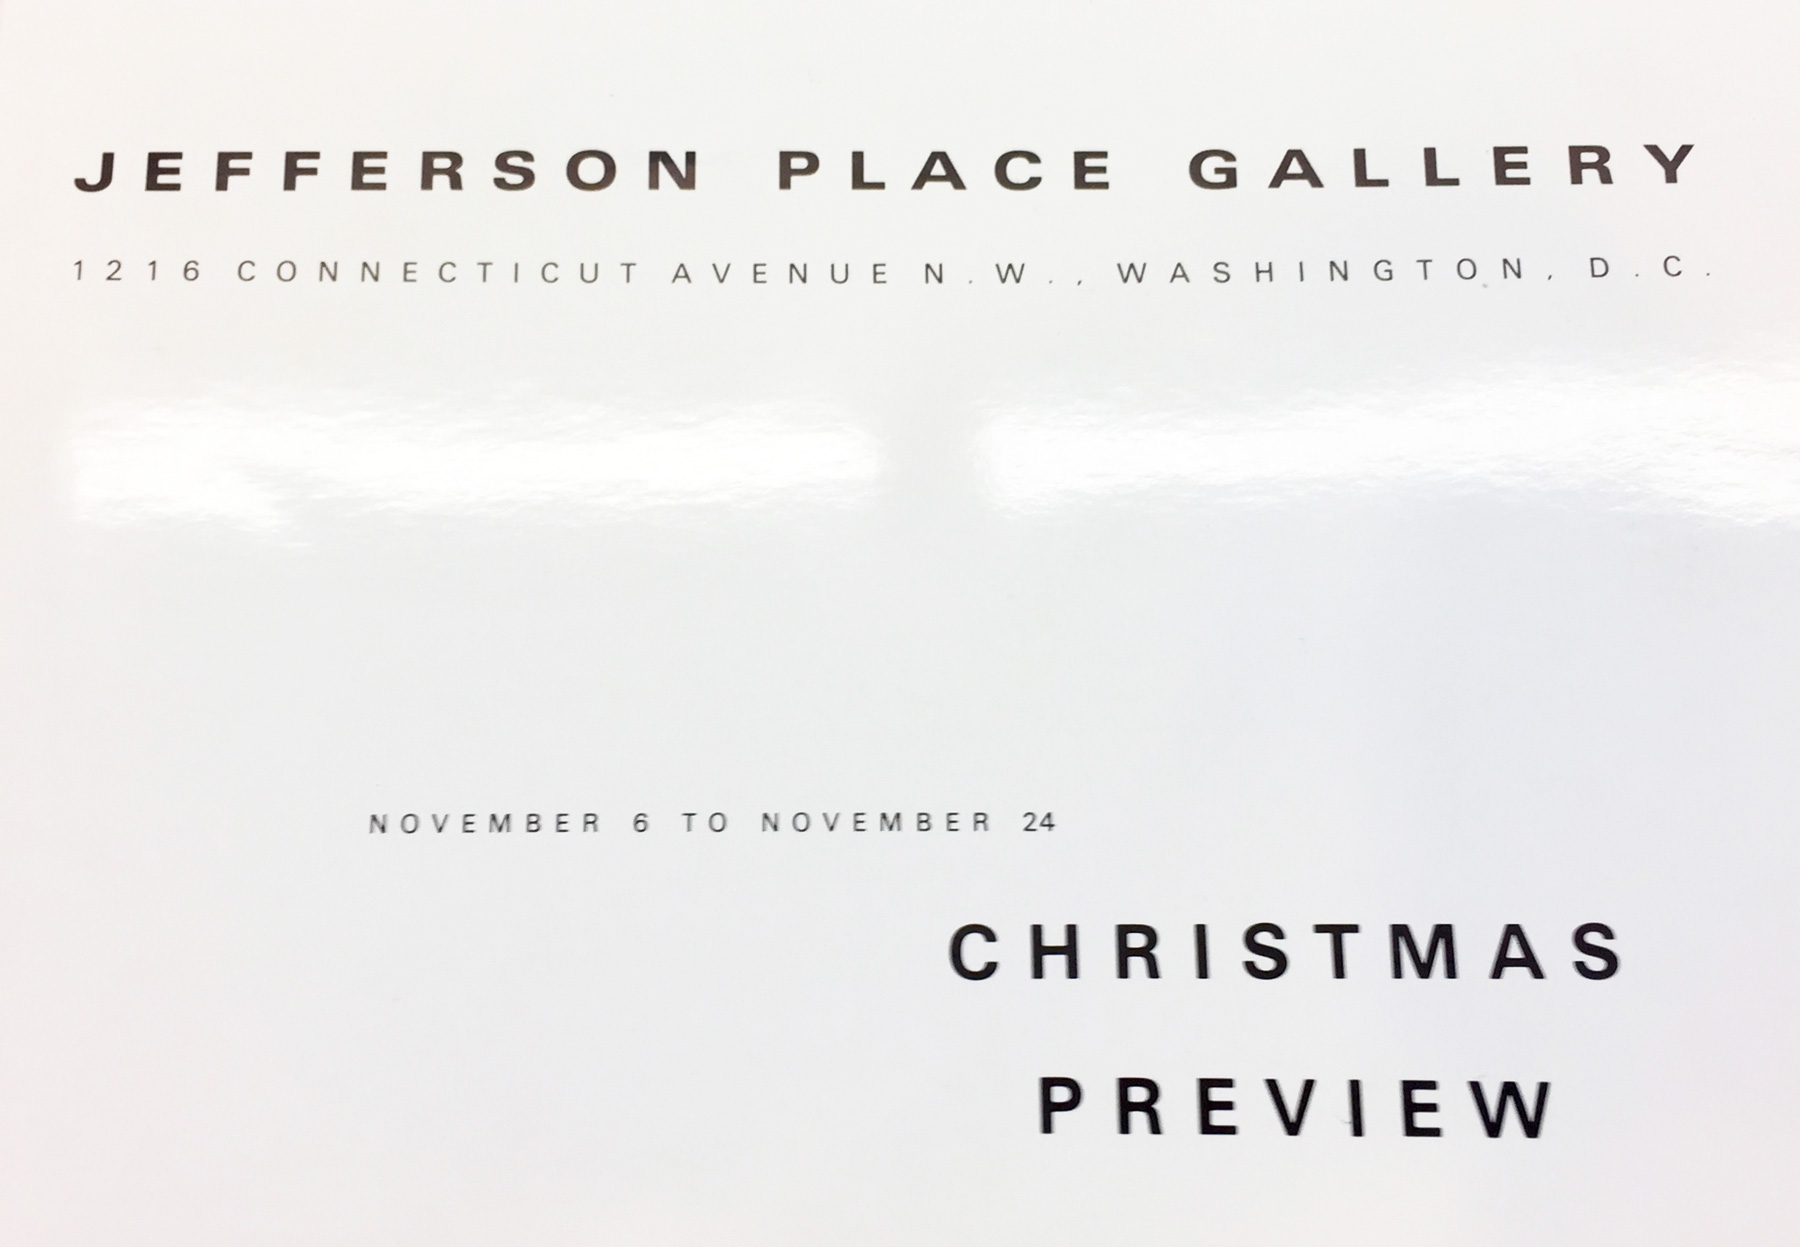 Announcement card for Christmas Show at Jefferson Place Gallery